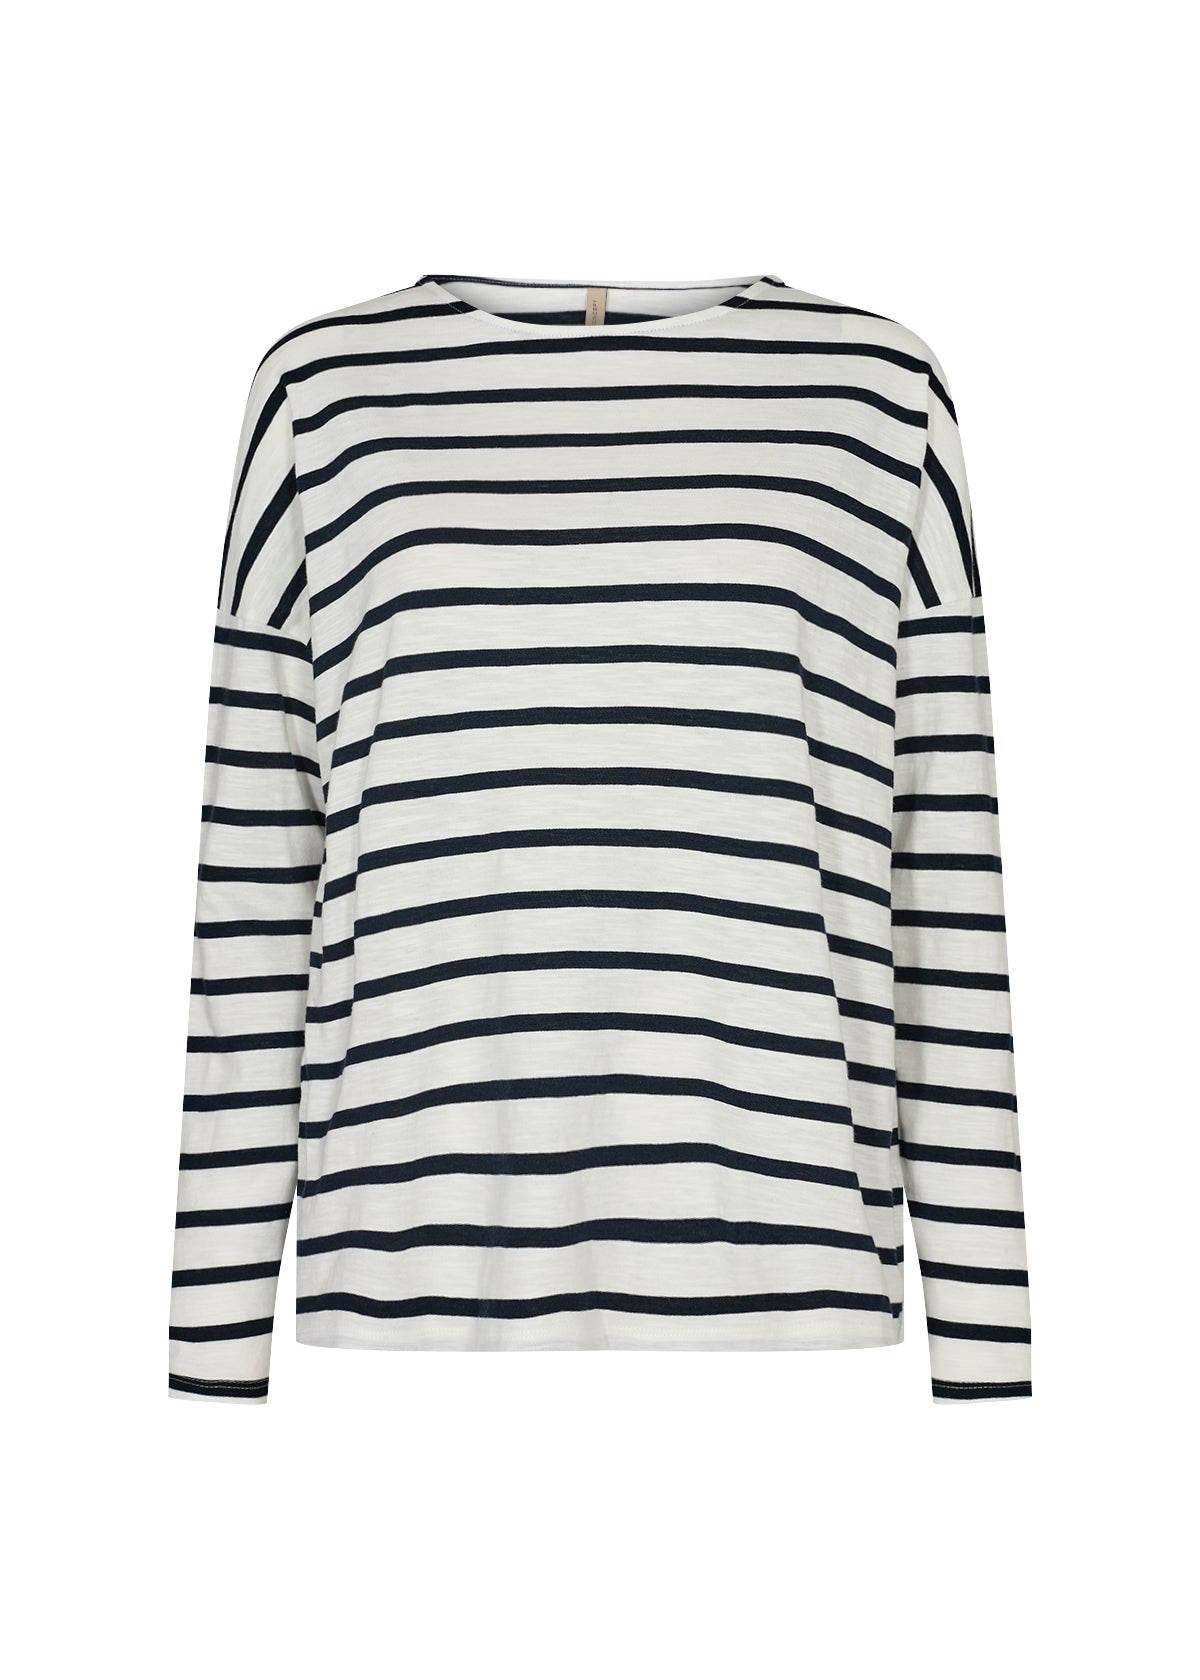 Soyaconcept - Camelia 2 Long Sleeve in Navy*